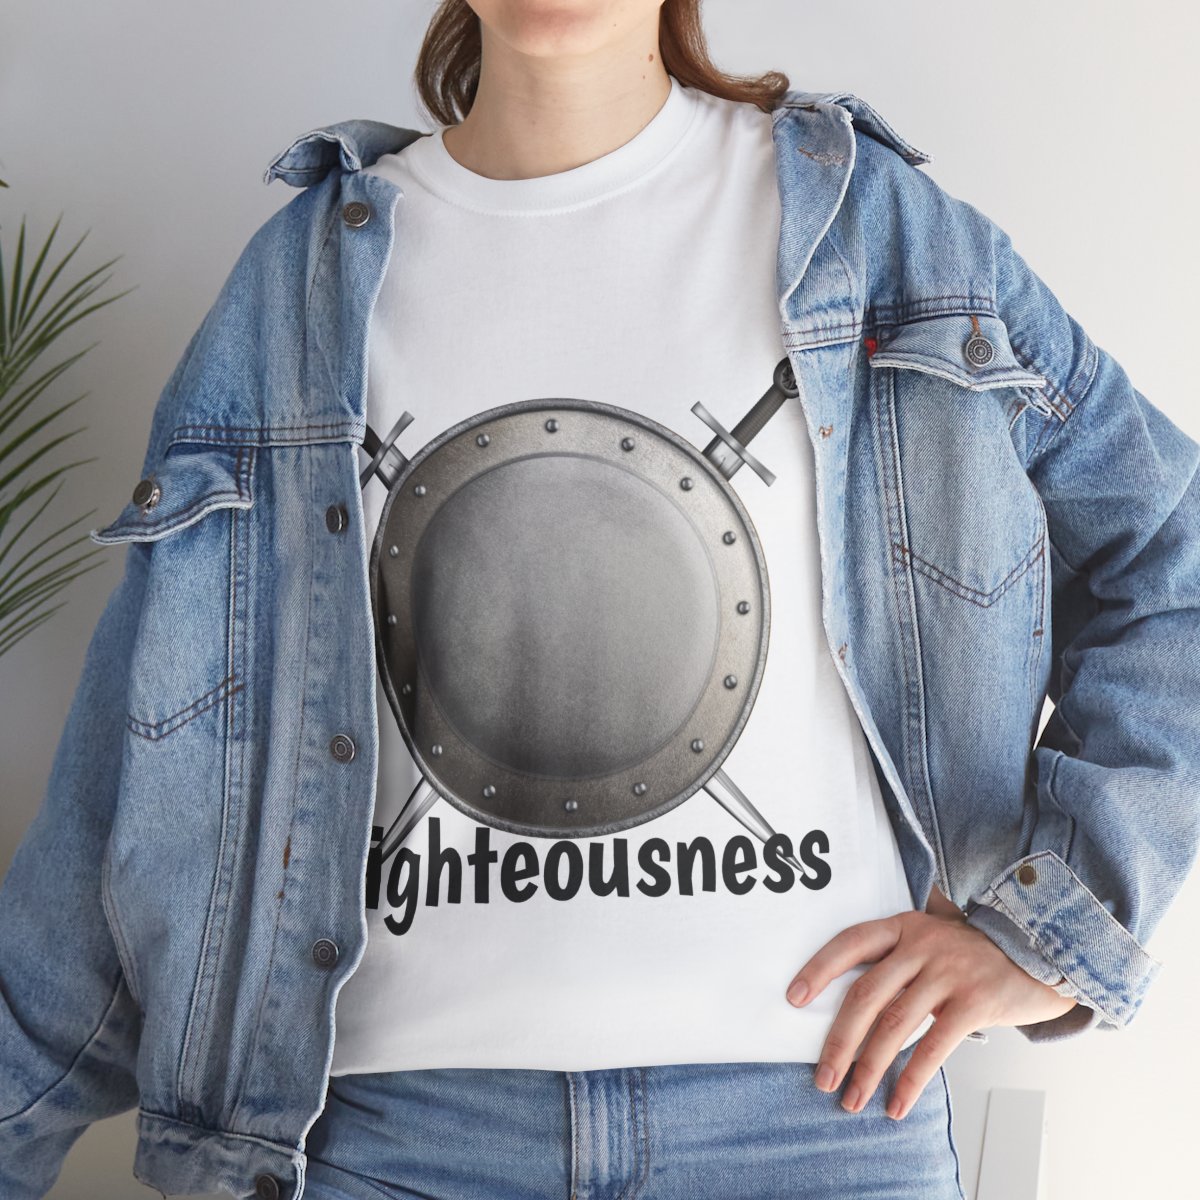 Righteousness T-Shirts (Gospel Armour Series) product thumbnail image